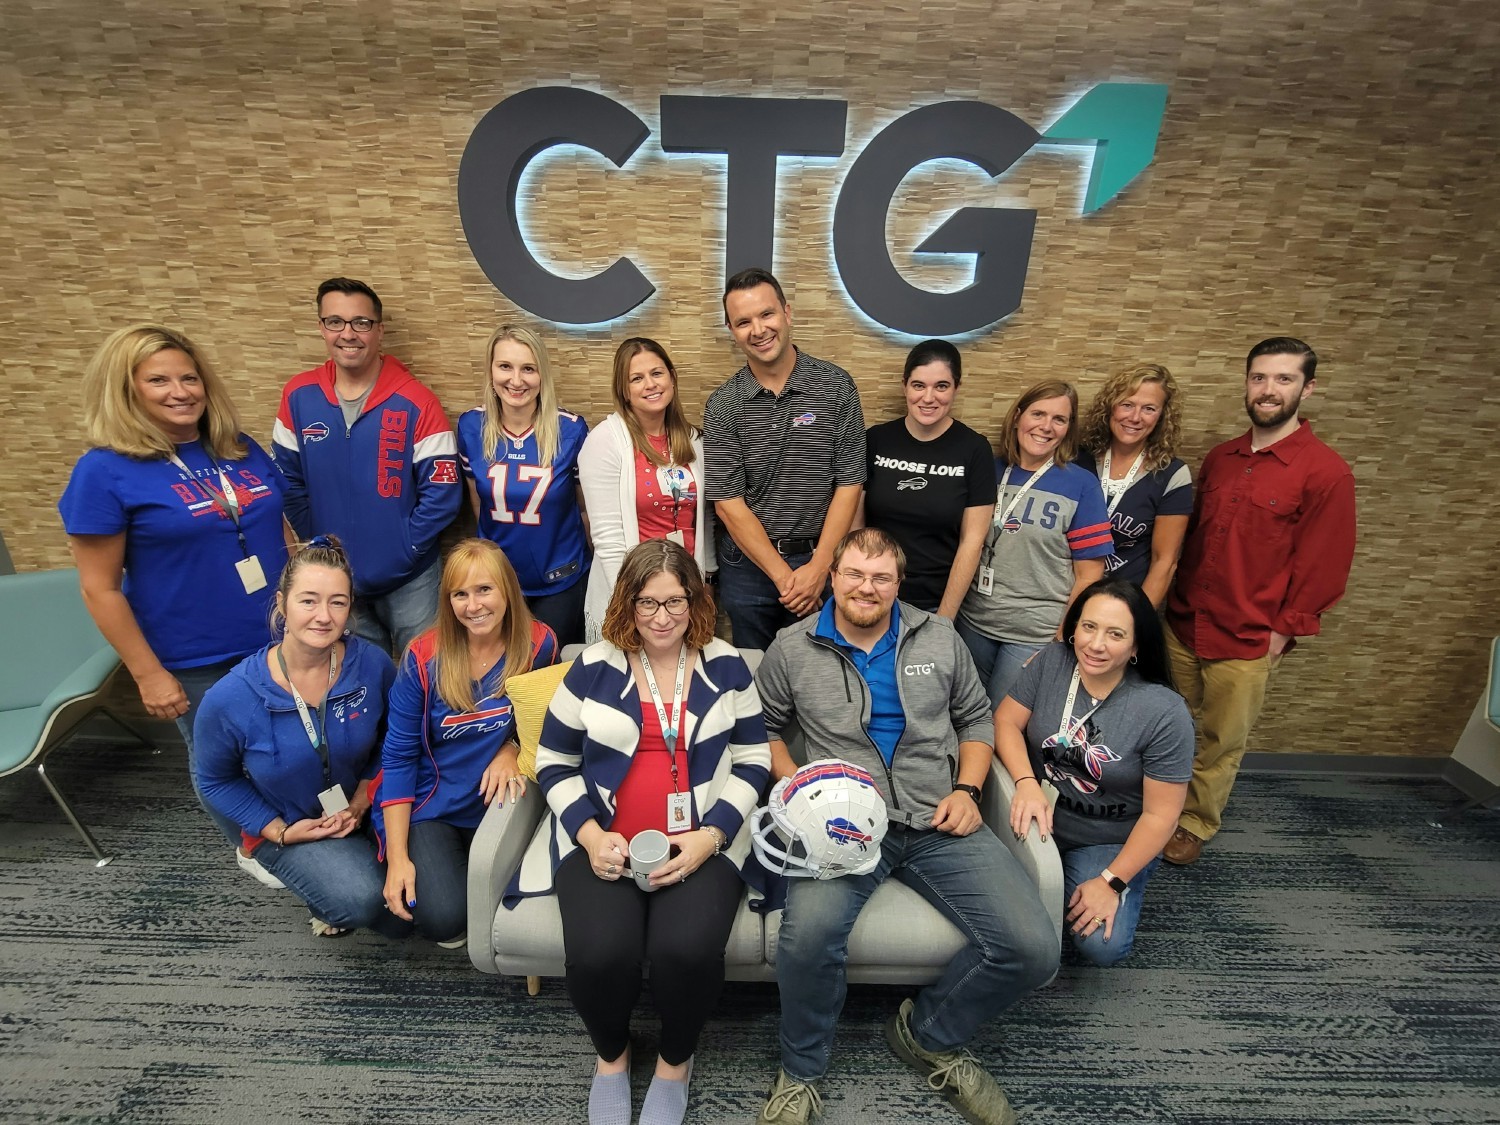 CTG - Computer Task Group, Incorporated Photo